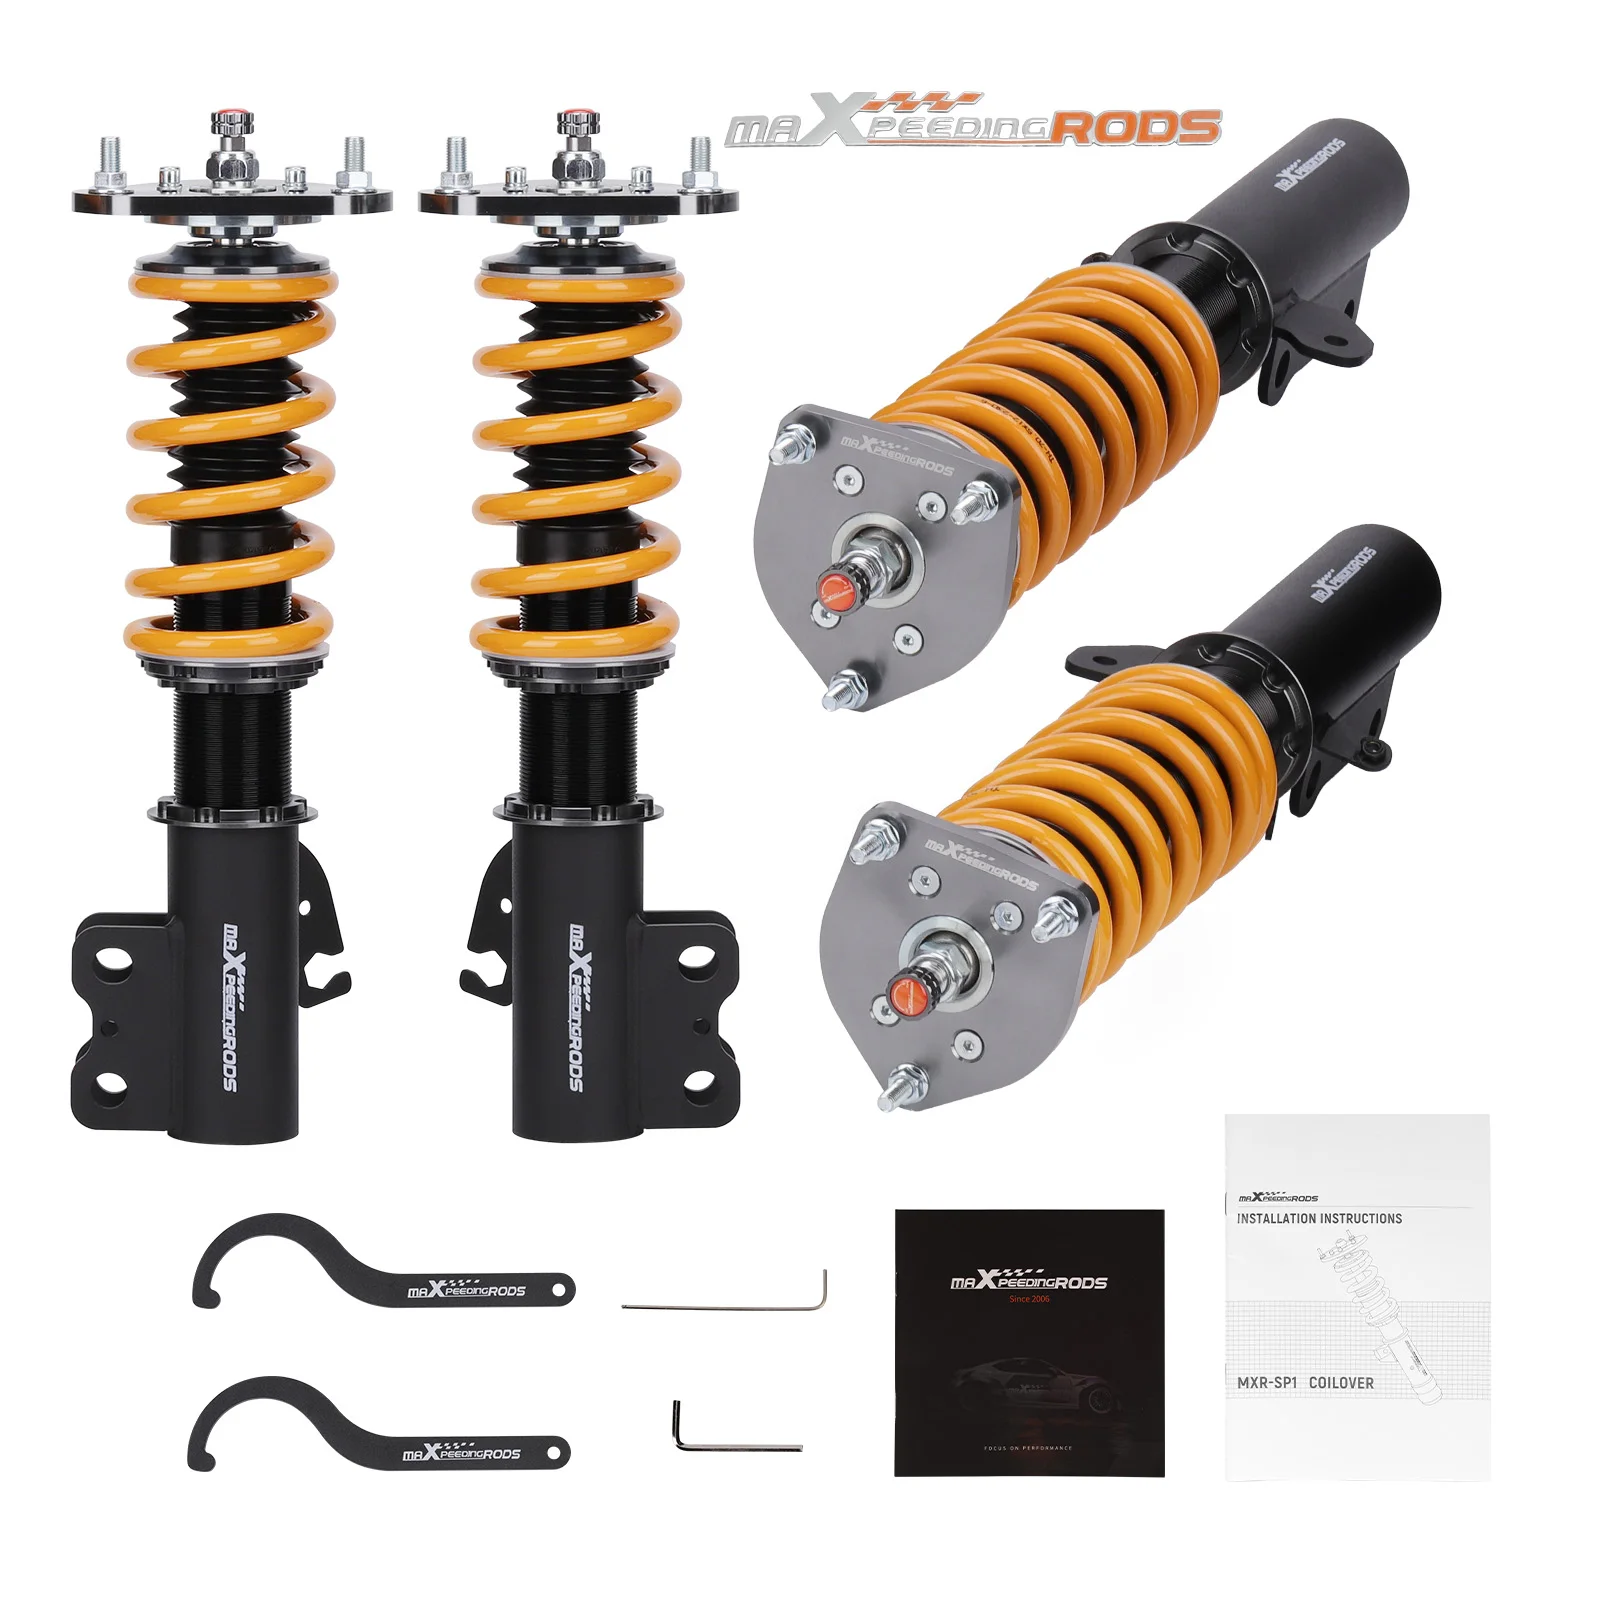 

Coilovers Shocks Absorber Springs Kits For Toyota Celica GT GTS FWD 1990-1993 Coilovers Lowering Kit Adjustable Coilover Shock